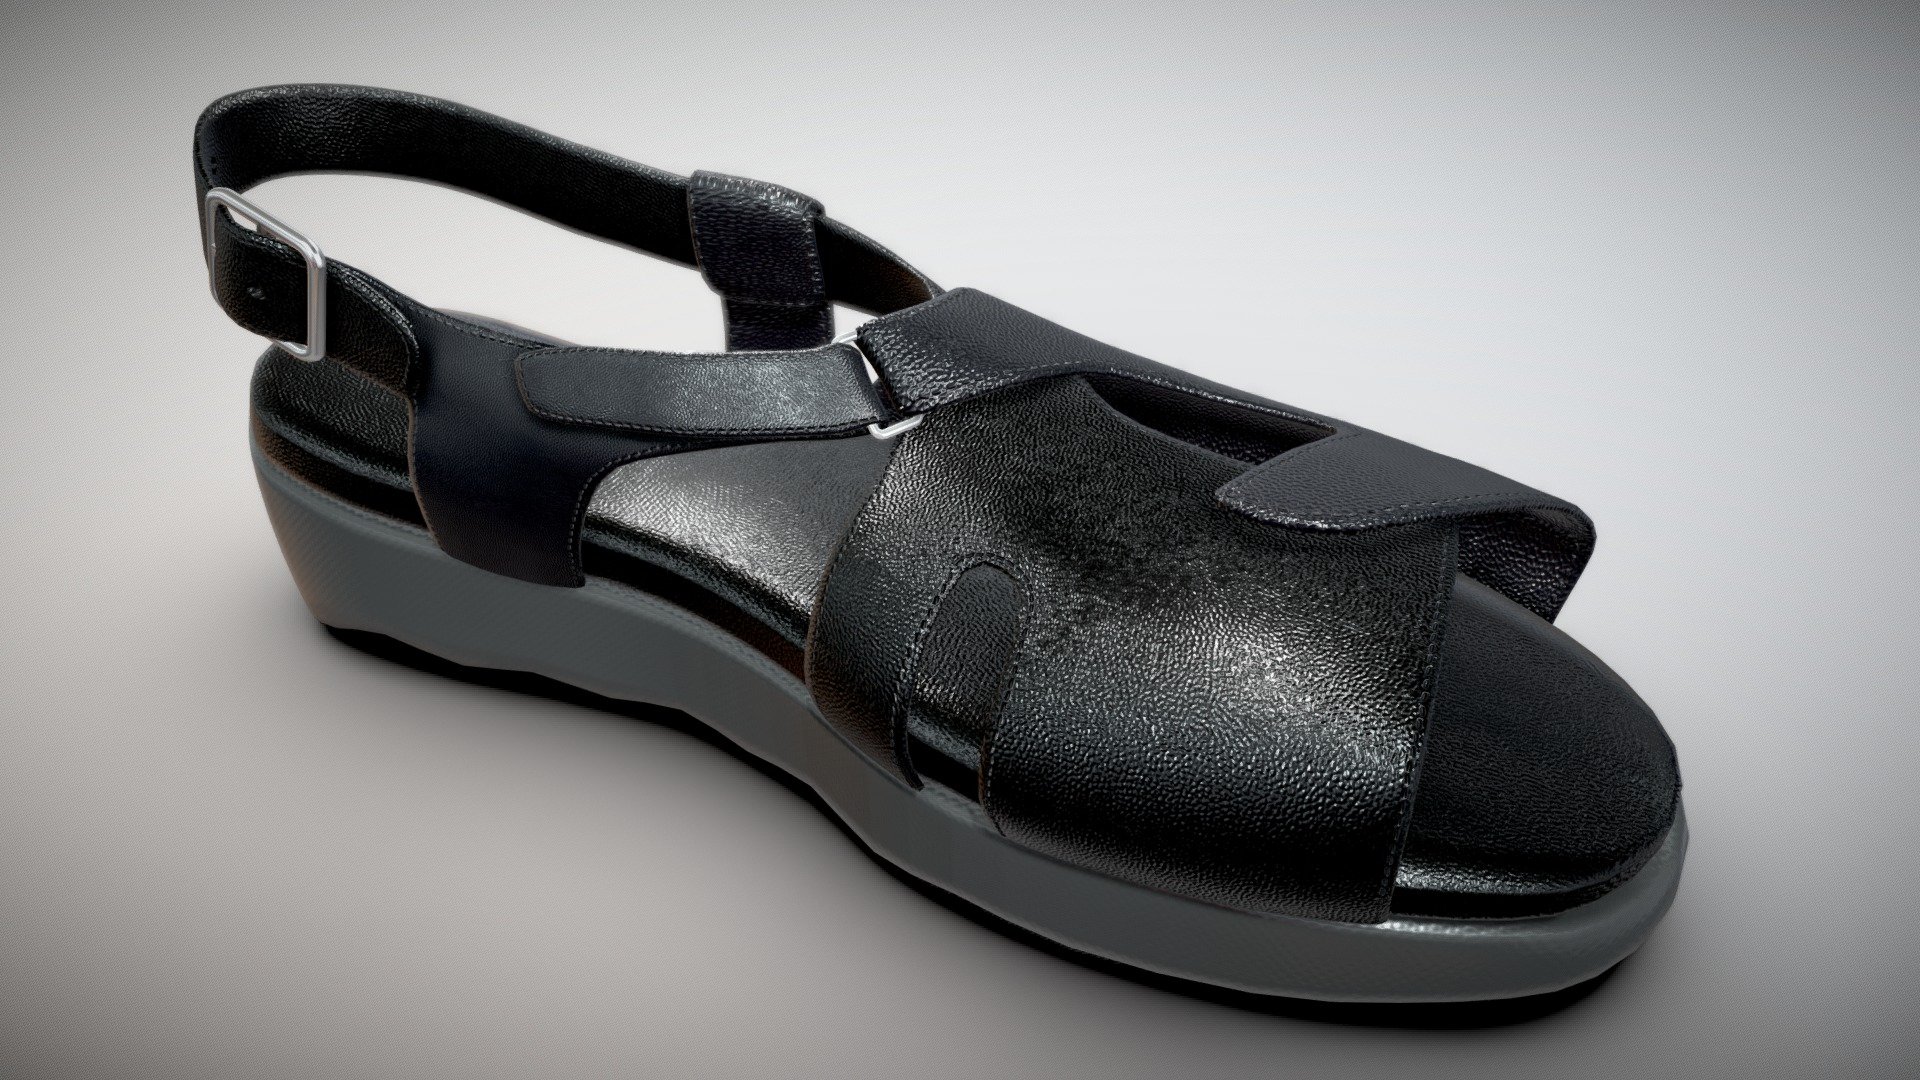 Beautifully designed black sandal. Perfect for characters. The relatively low-poly design allows you to make your own adjustments and animations. 

Modeled with 3ds Max and textured with Substance Painter 3d model